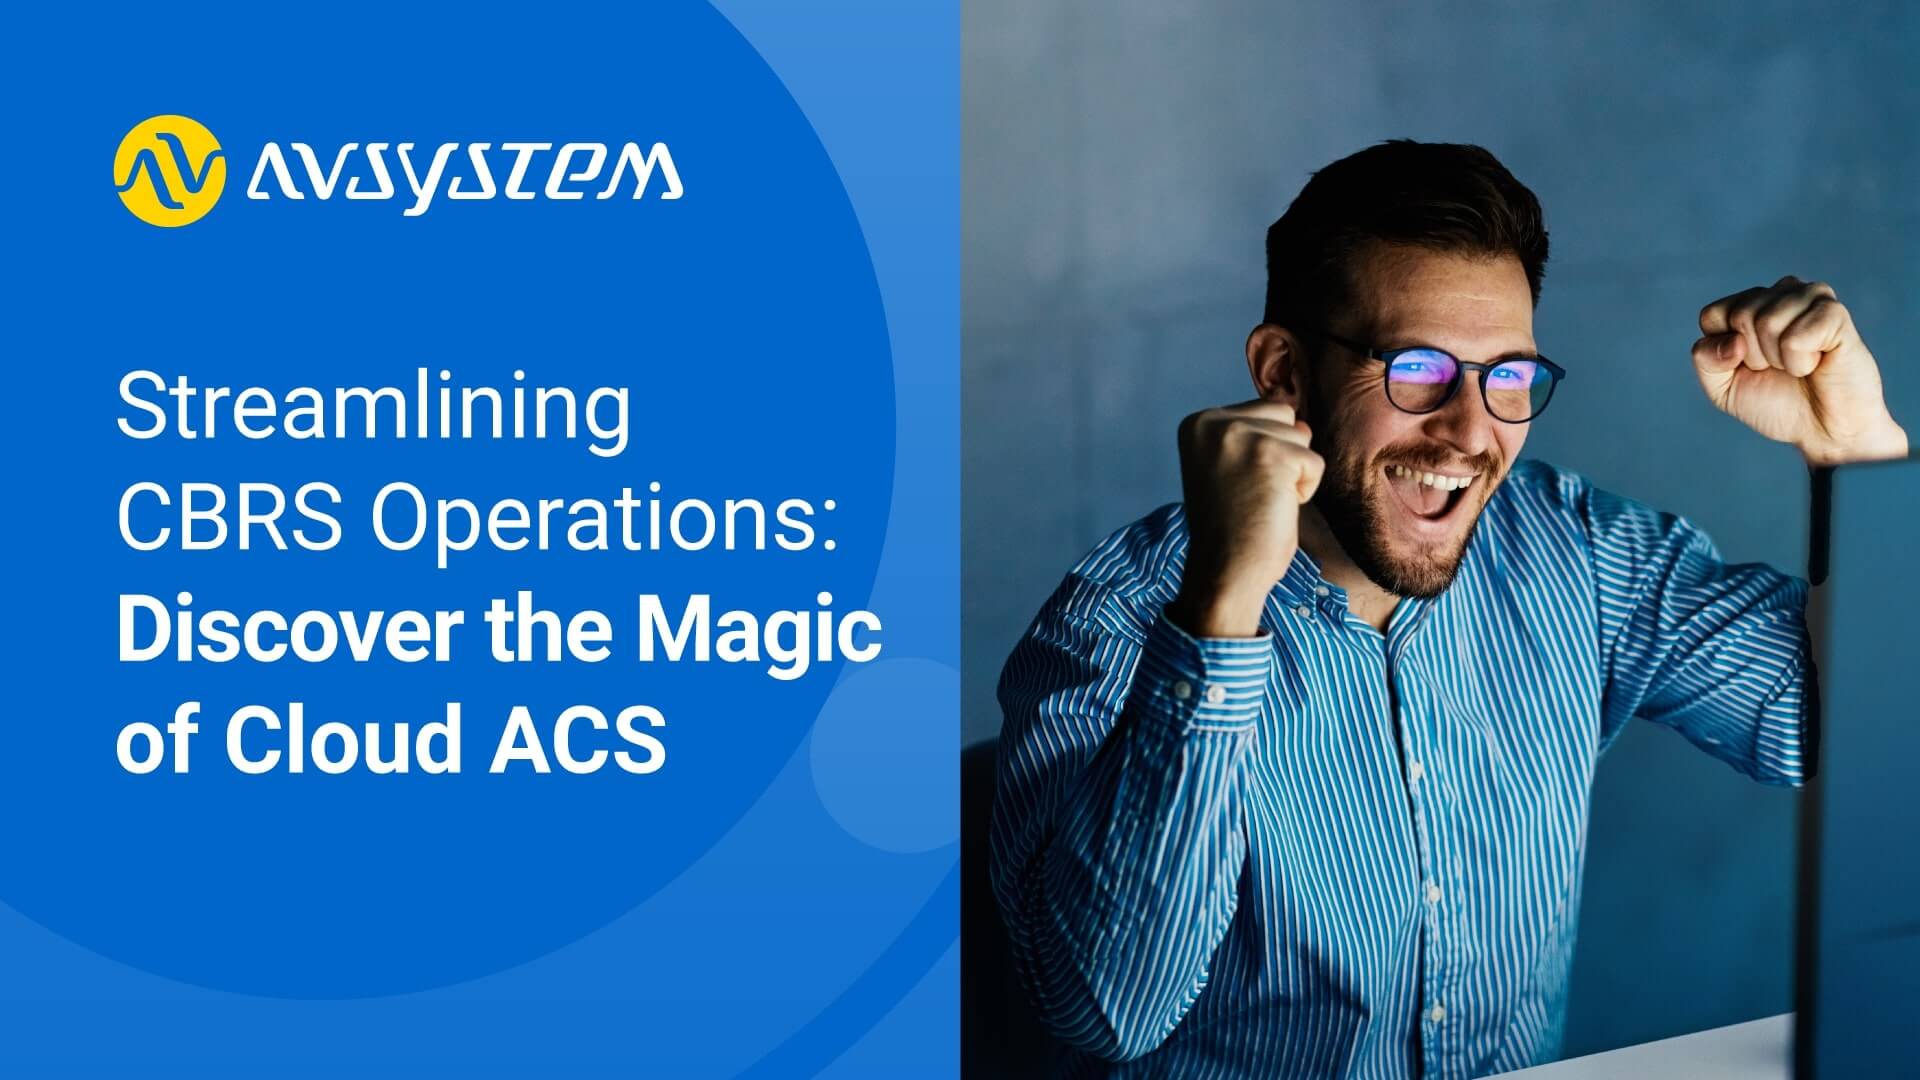 Streamlining CBRS Operations: Discover the Magic of Cloud ACS